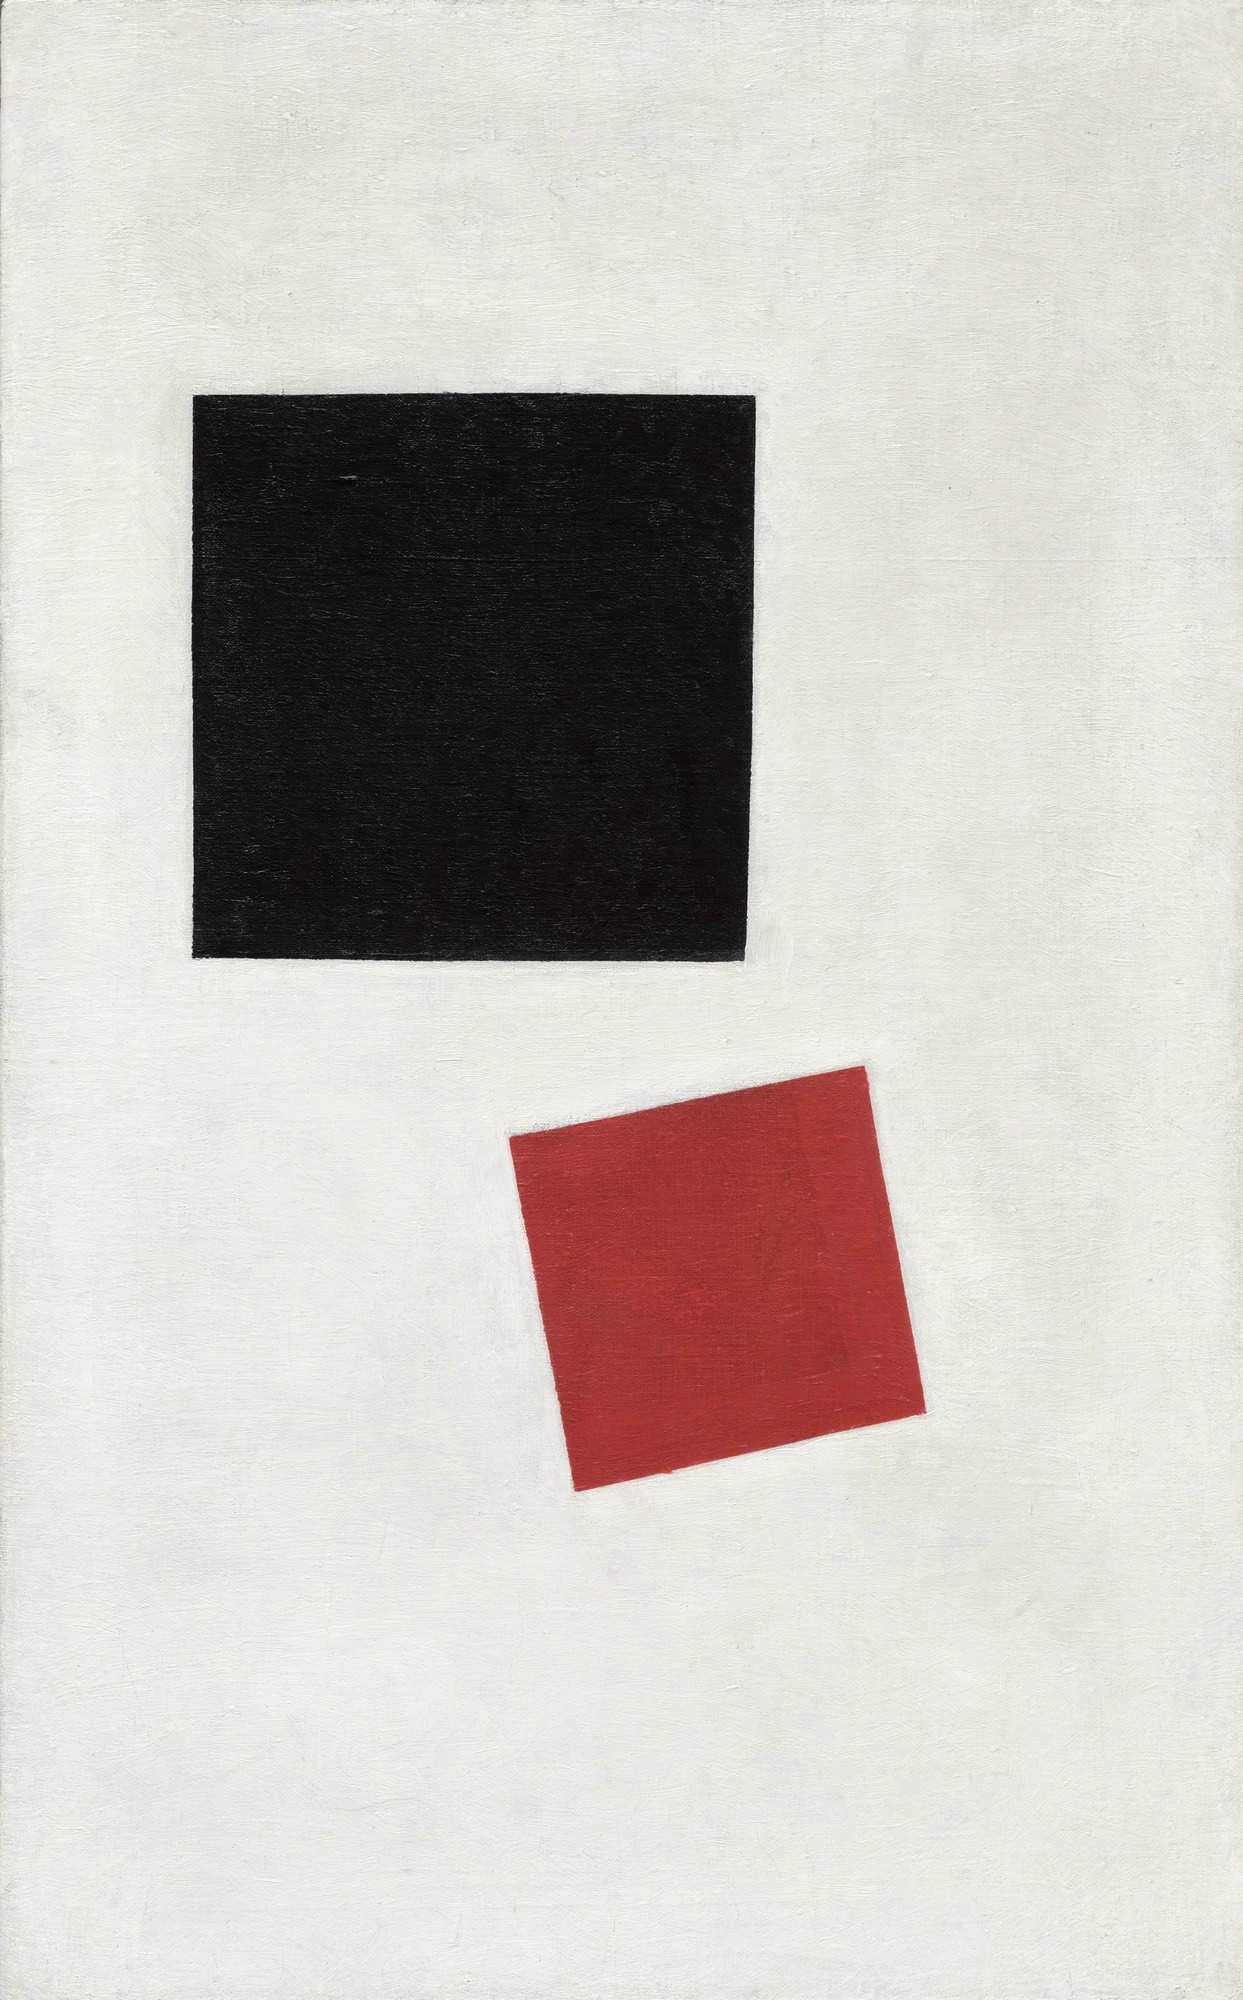 Black Square and Red Square, Kazimir Malevich